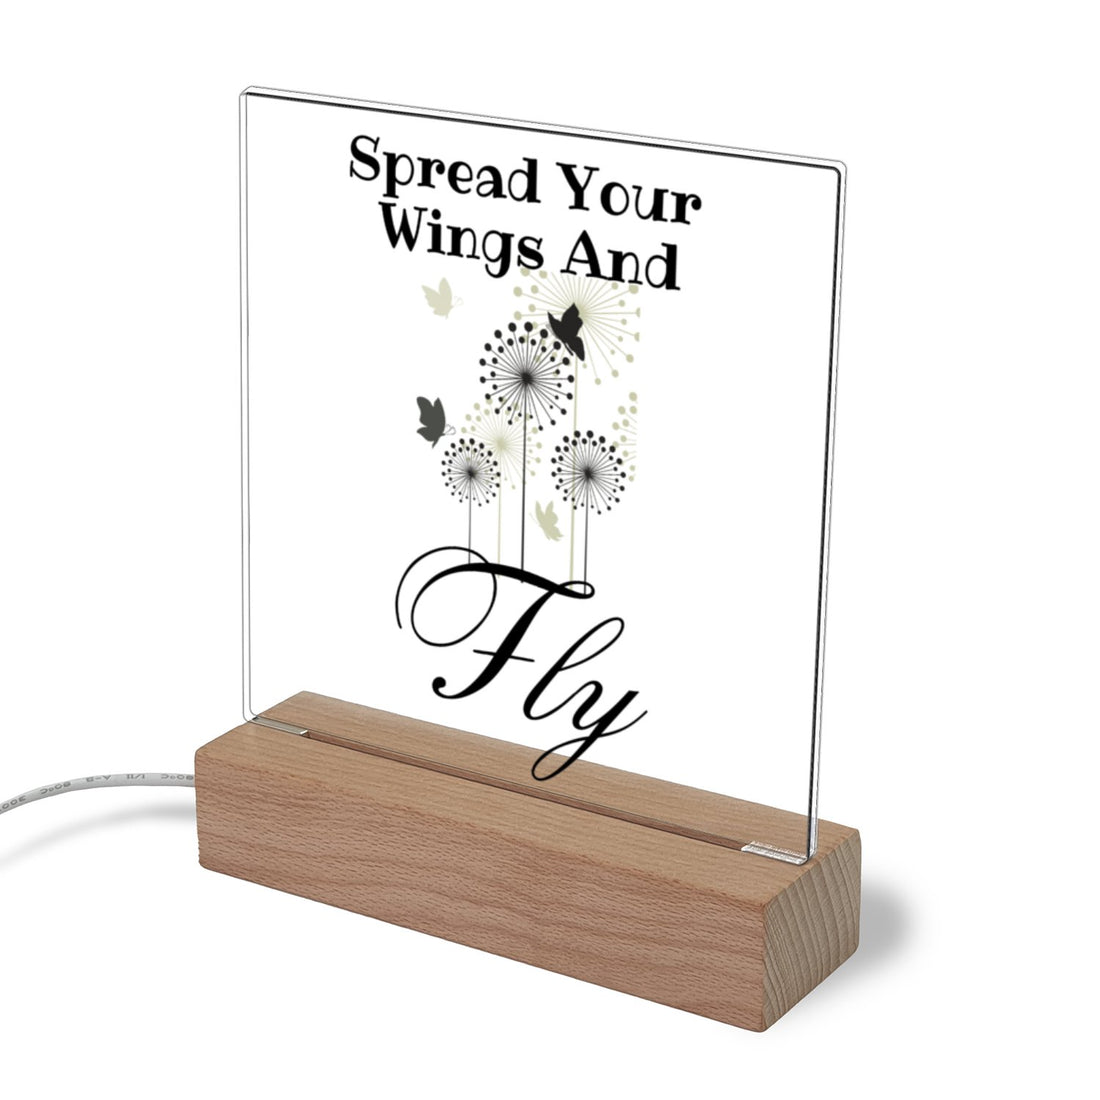 Spread Your Wings Plaque - Positively Sassy - Spread Your Wings Plaque